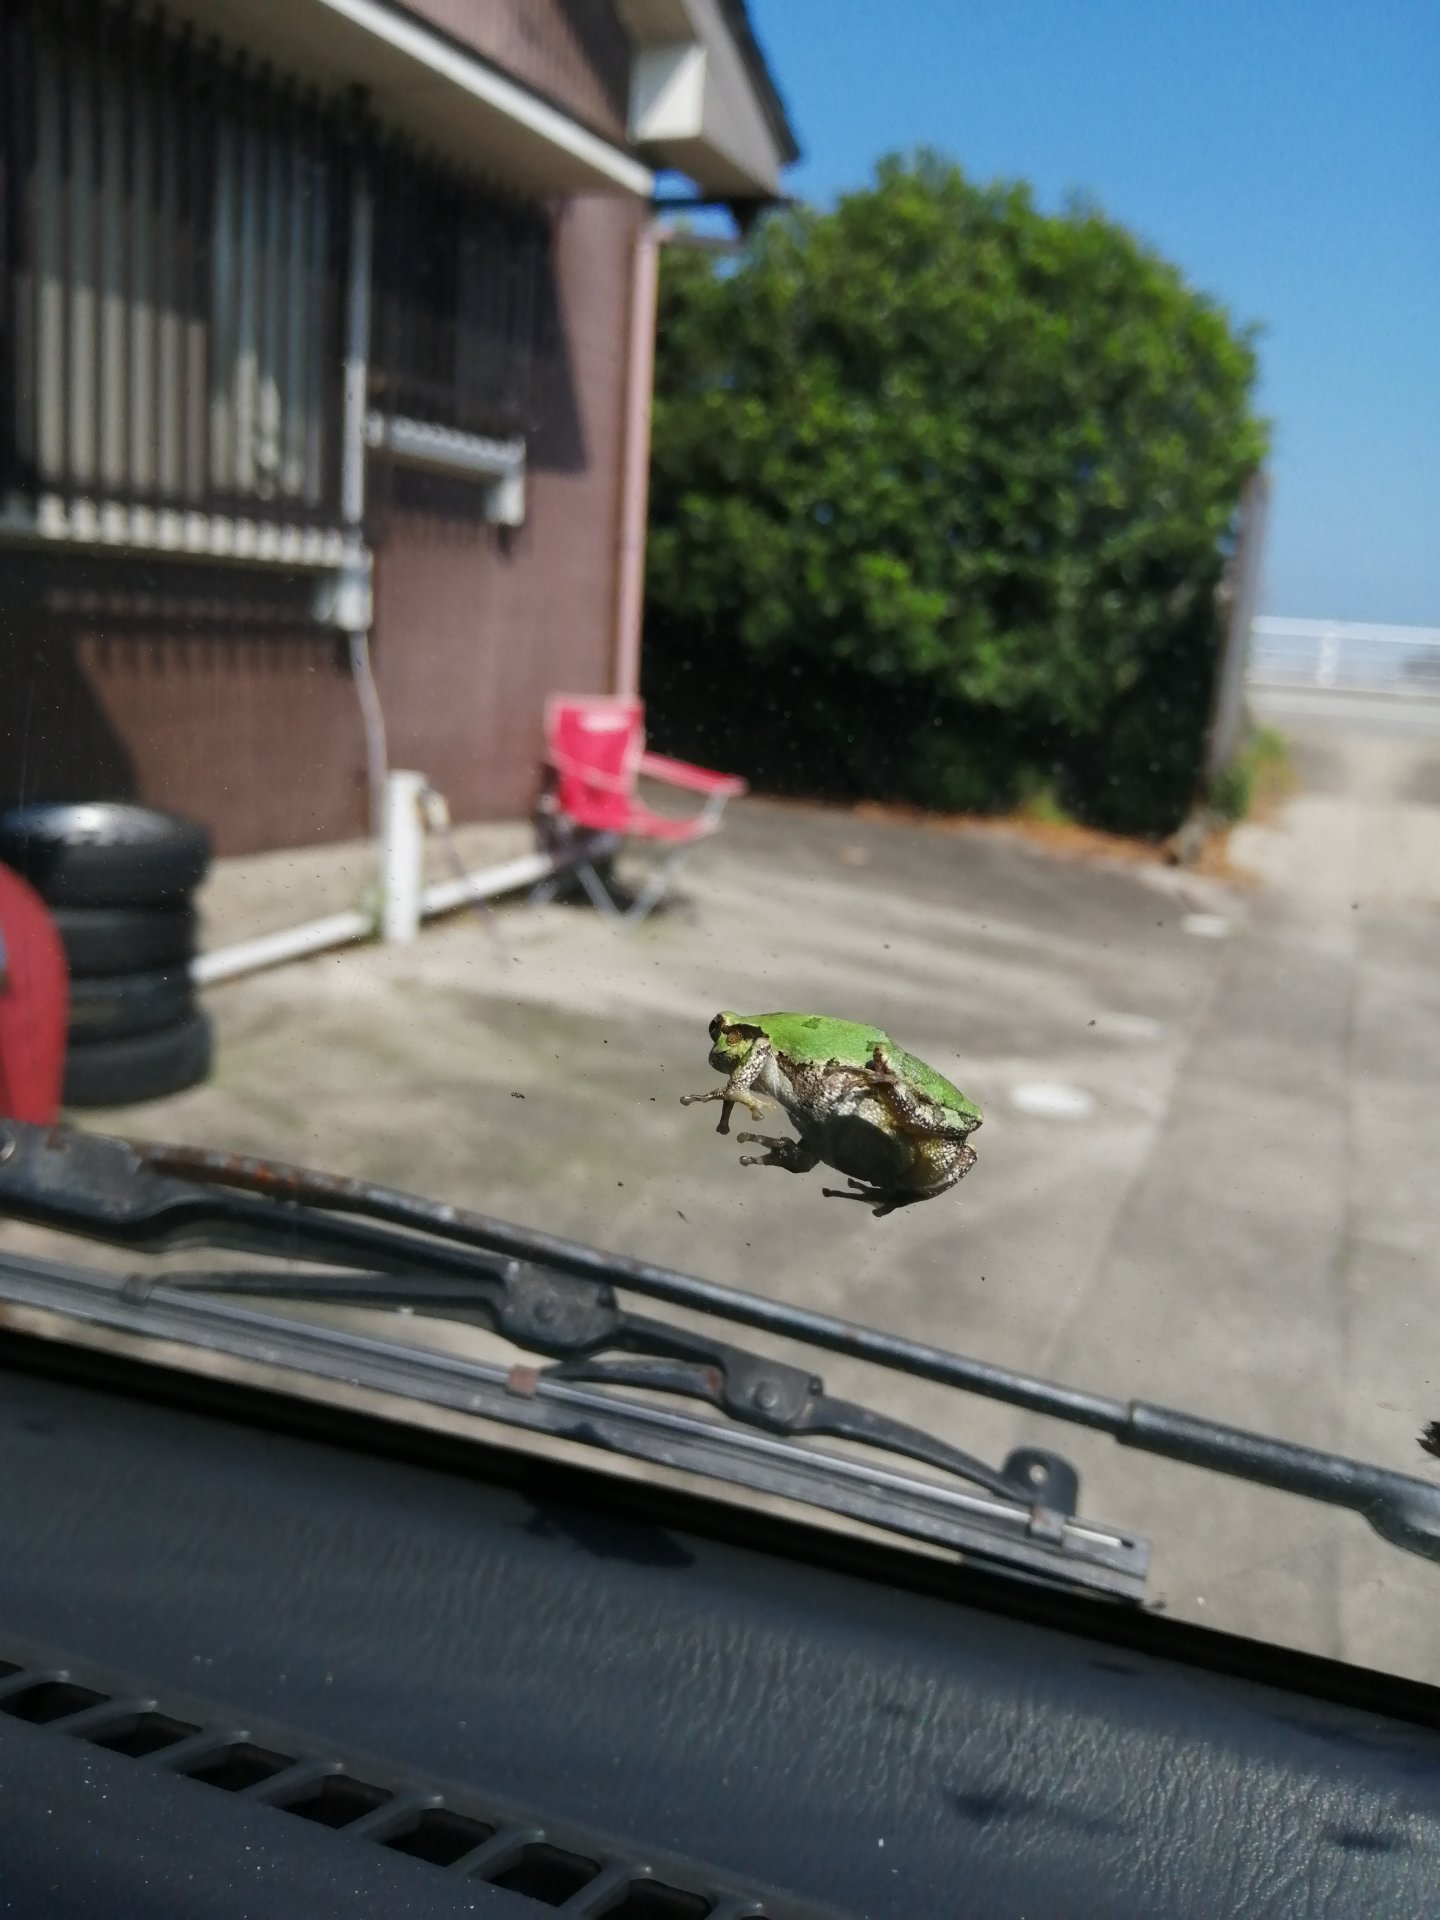 Somebody hitched a ride!